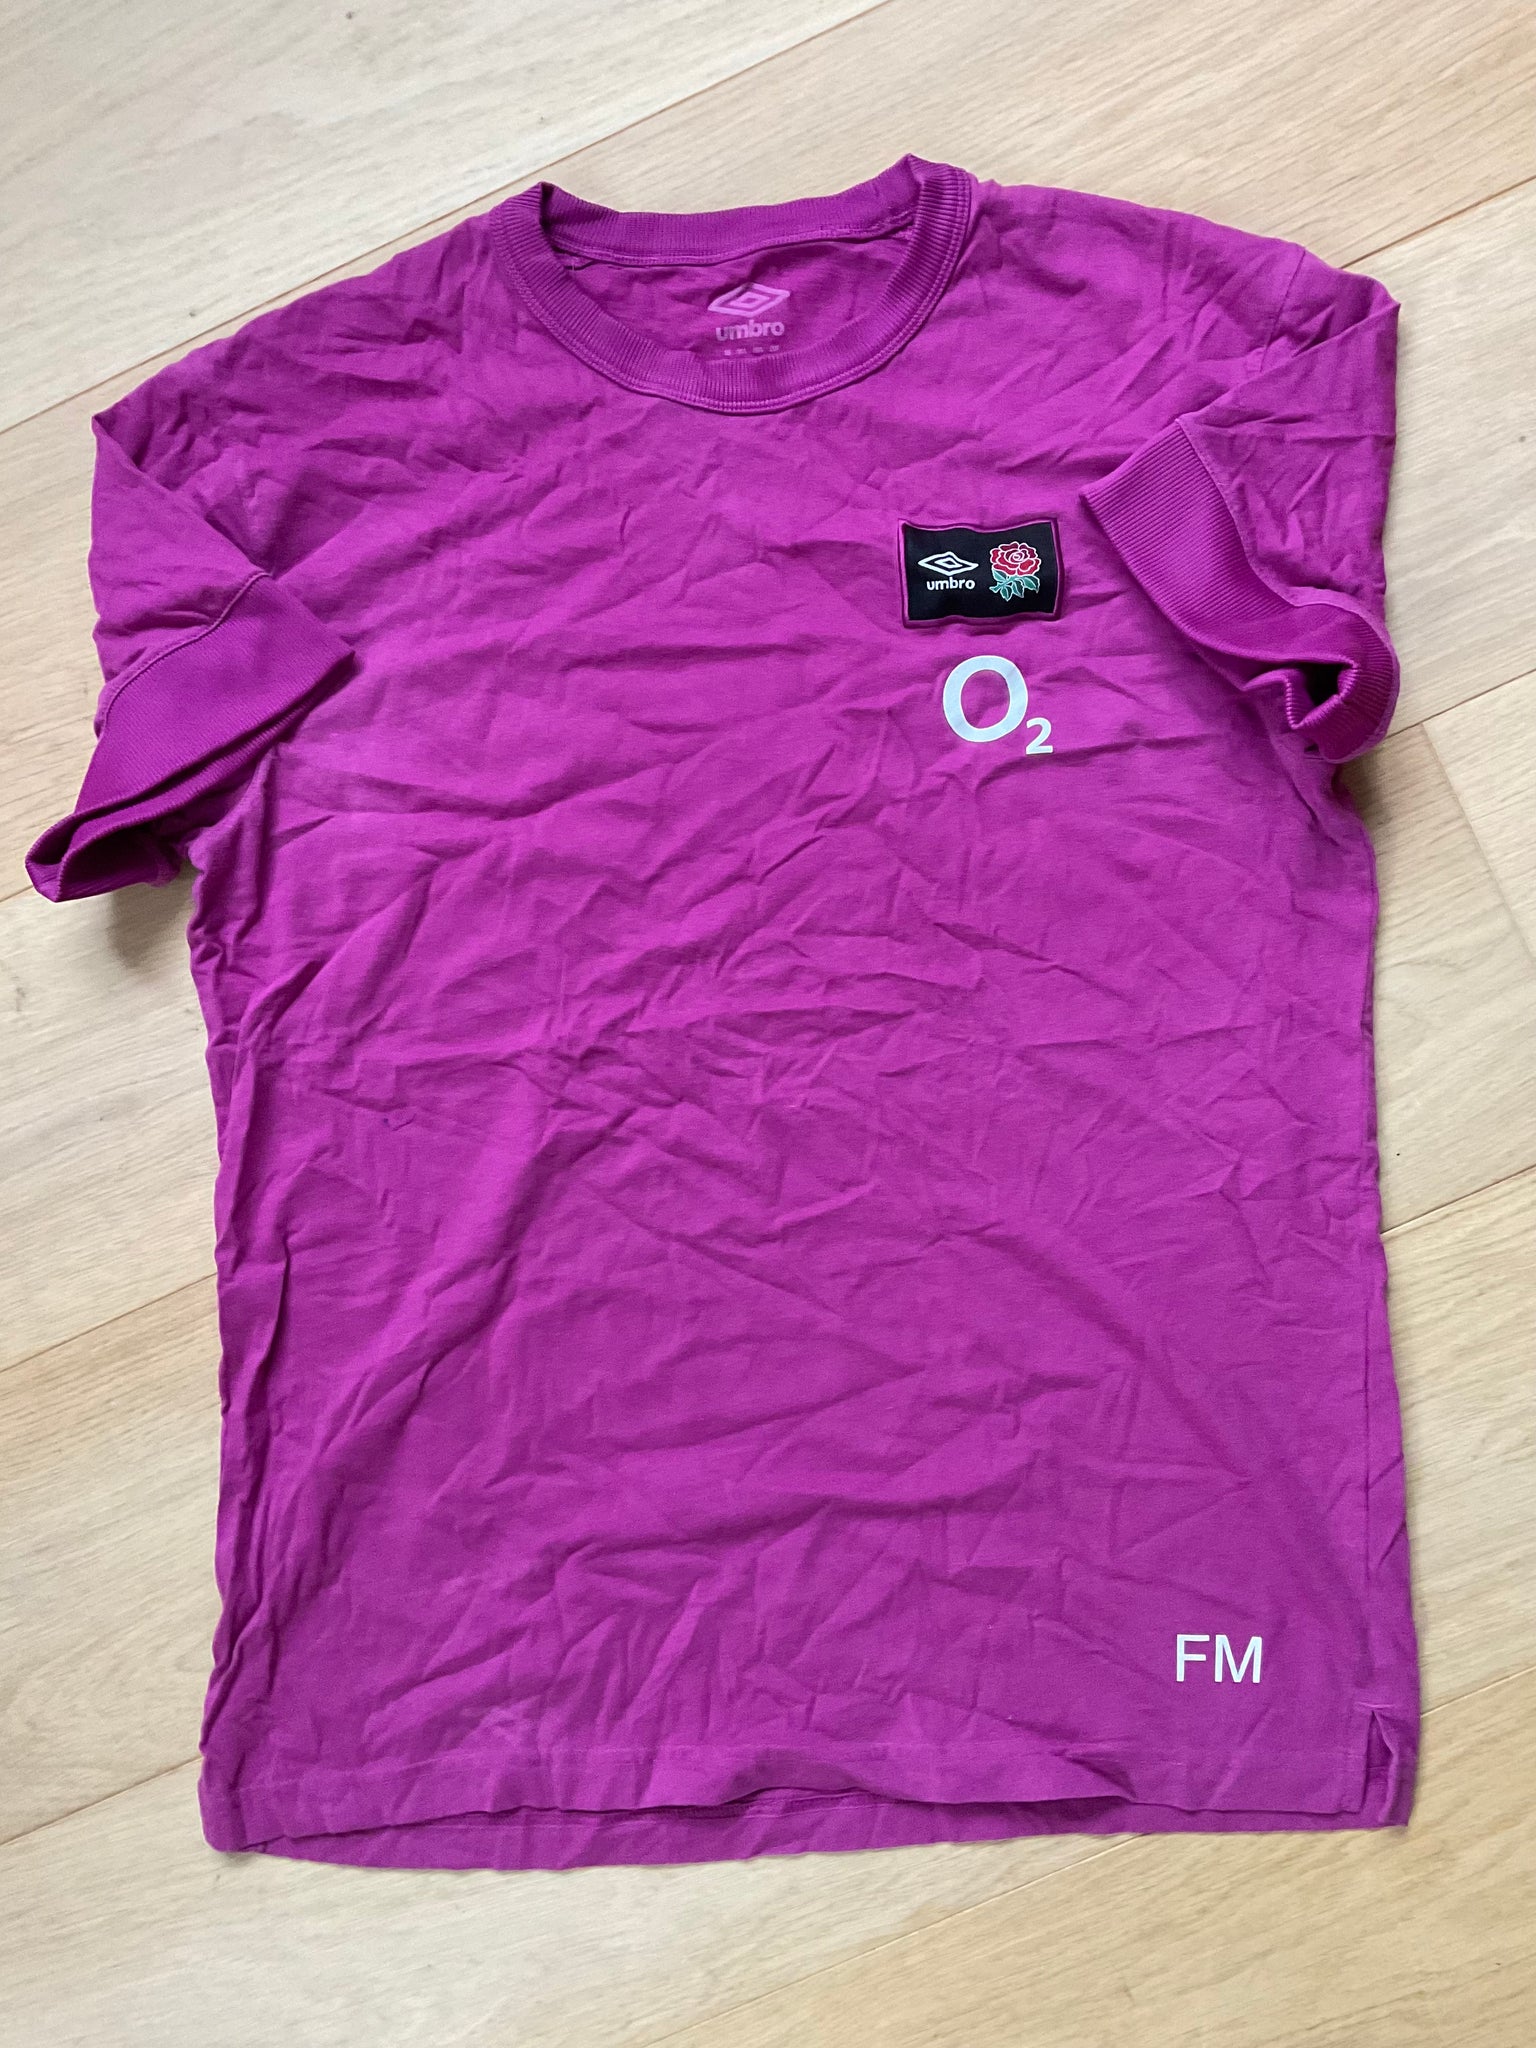 FM Initials - England Rugby Travel T-Shirt [Pink]